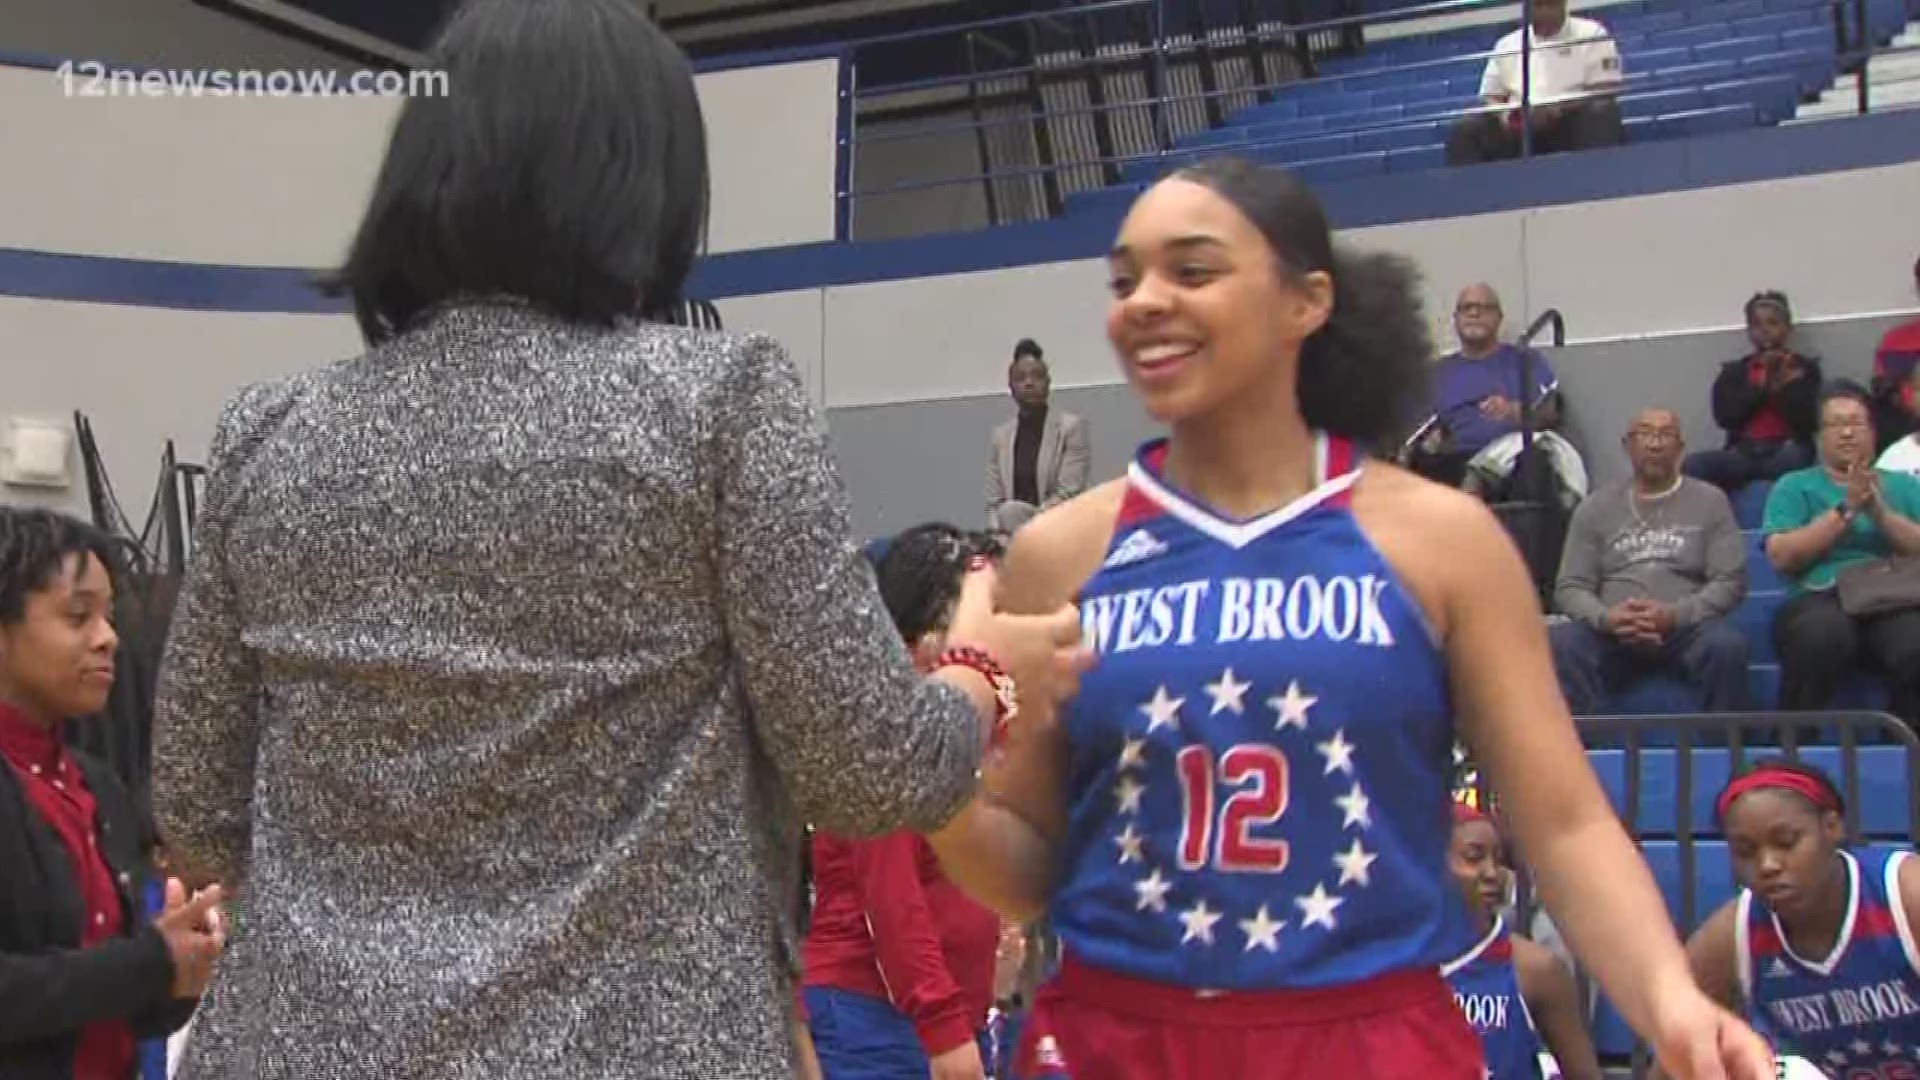 West Brook finishes the season,21-10 overall